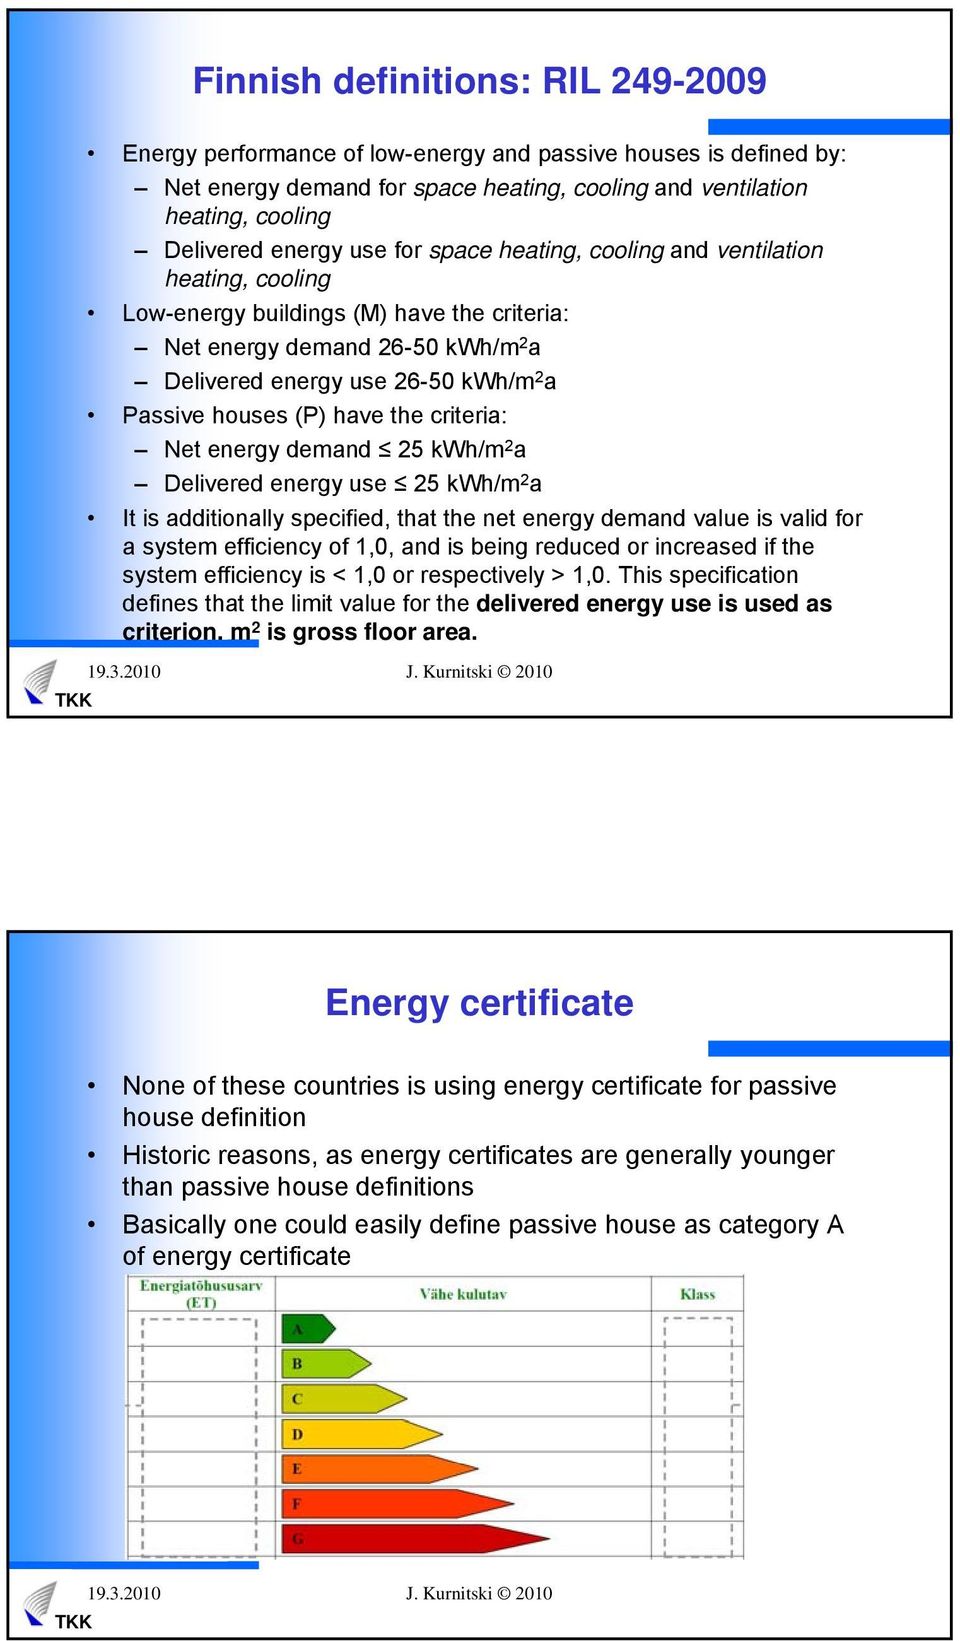 the criteria: Net energy demand 25 kwh/m 2 a Delivered energy use 25 kwh/m 2 a It is additionally specified, that the net energy demand value is valid for a system efficiency of 1,0, and is being